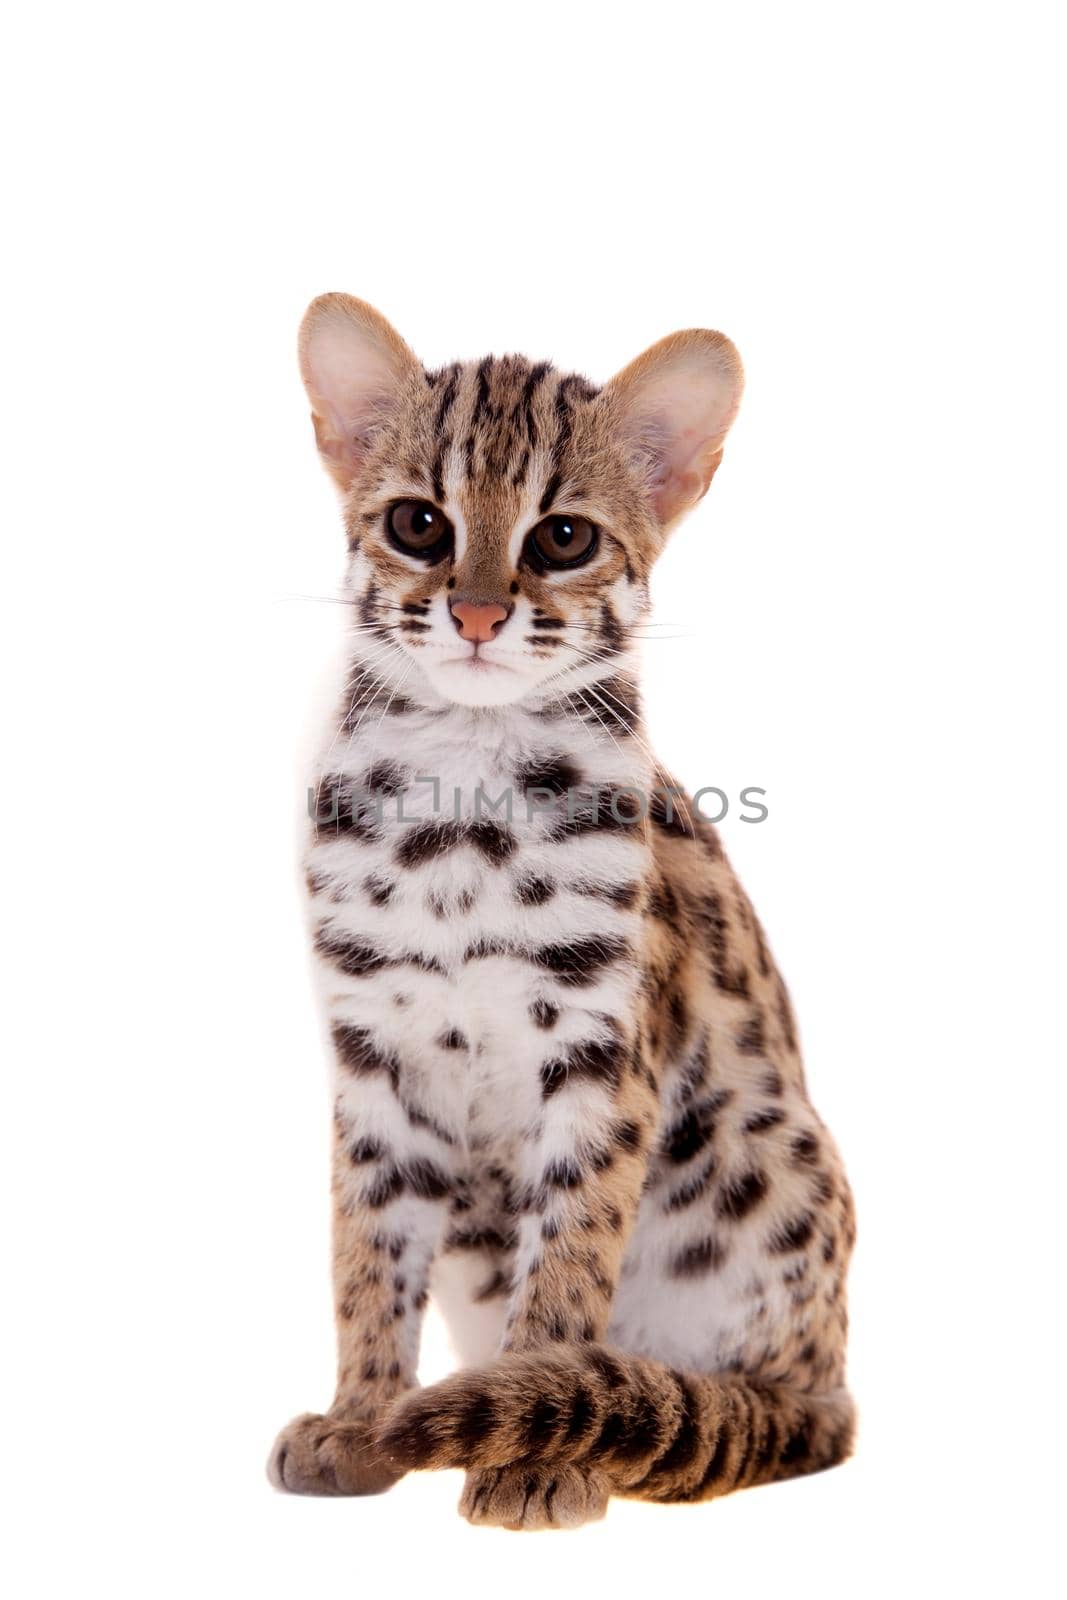 Asian leopard cat, Prionailurus bengalensis, isolated on white